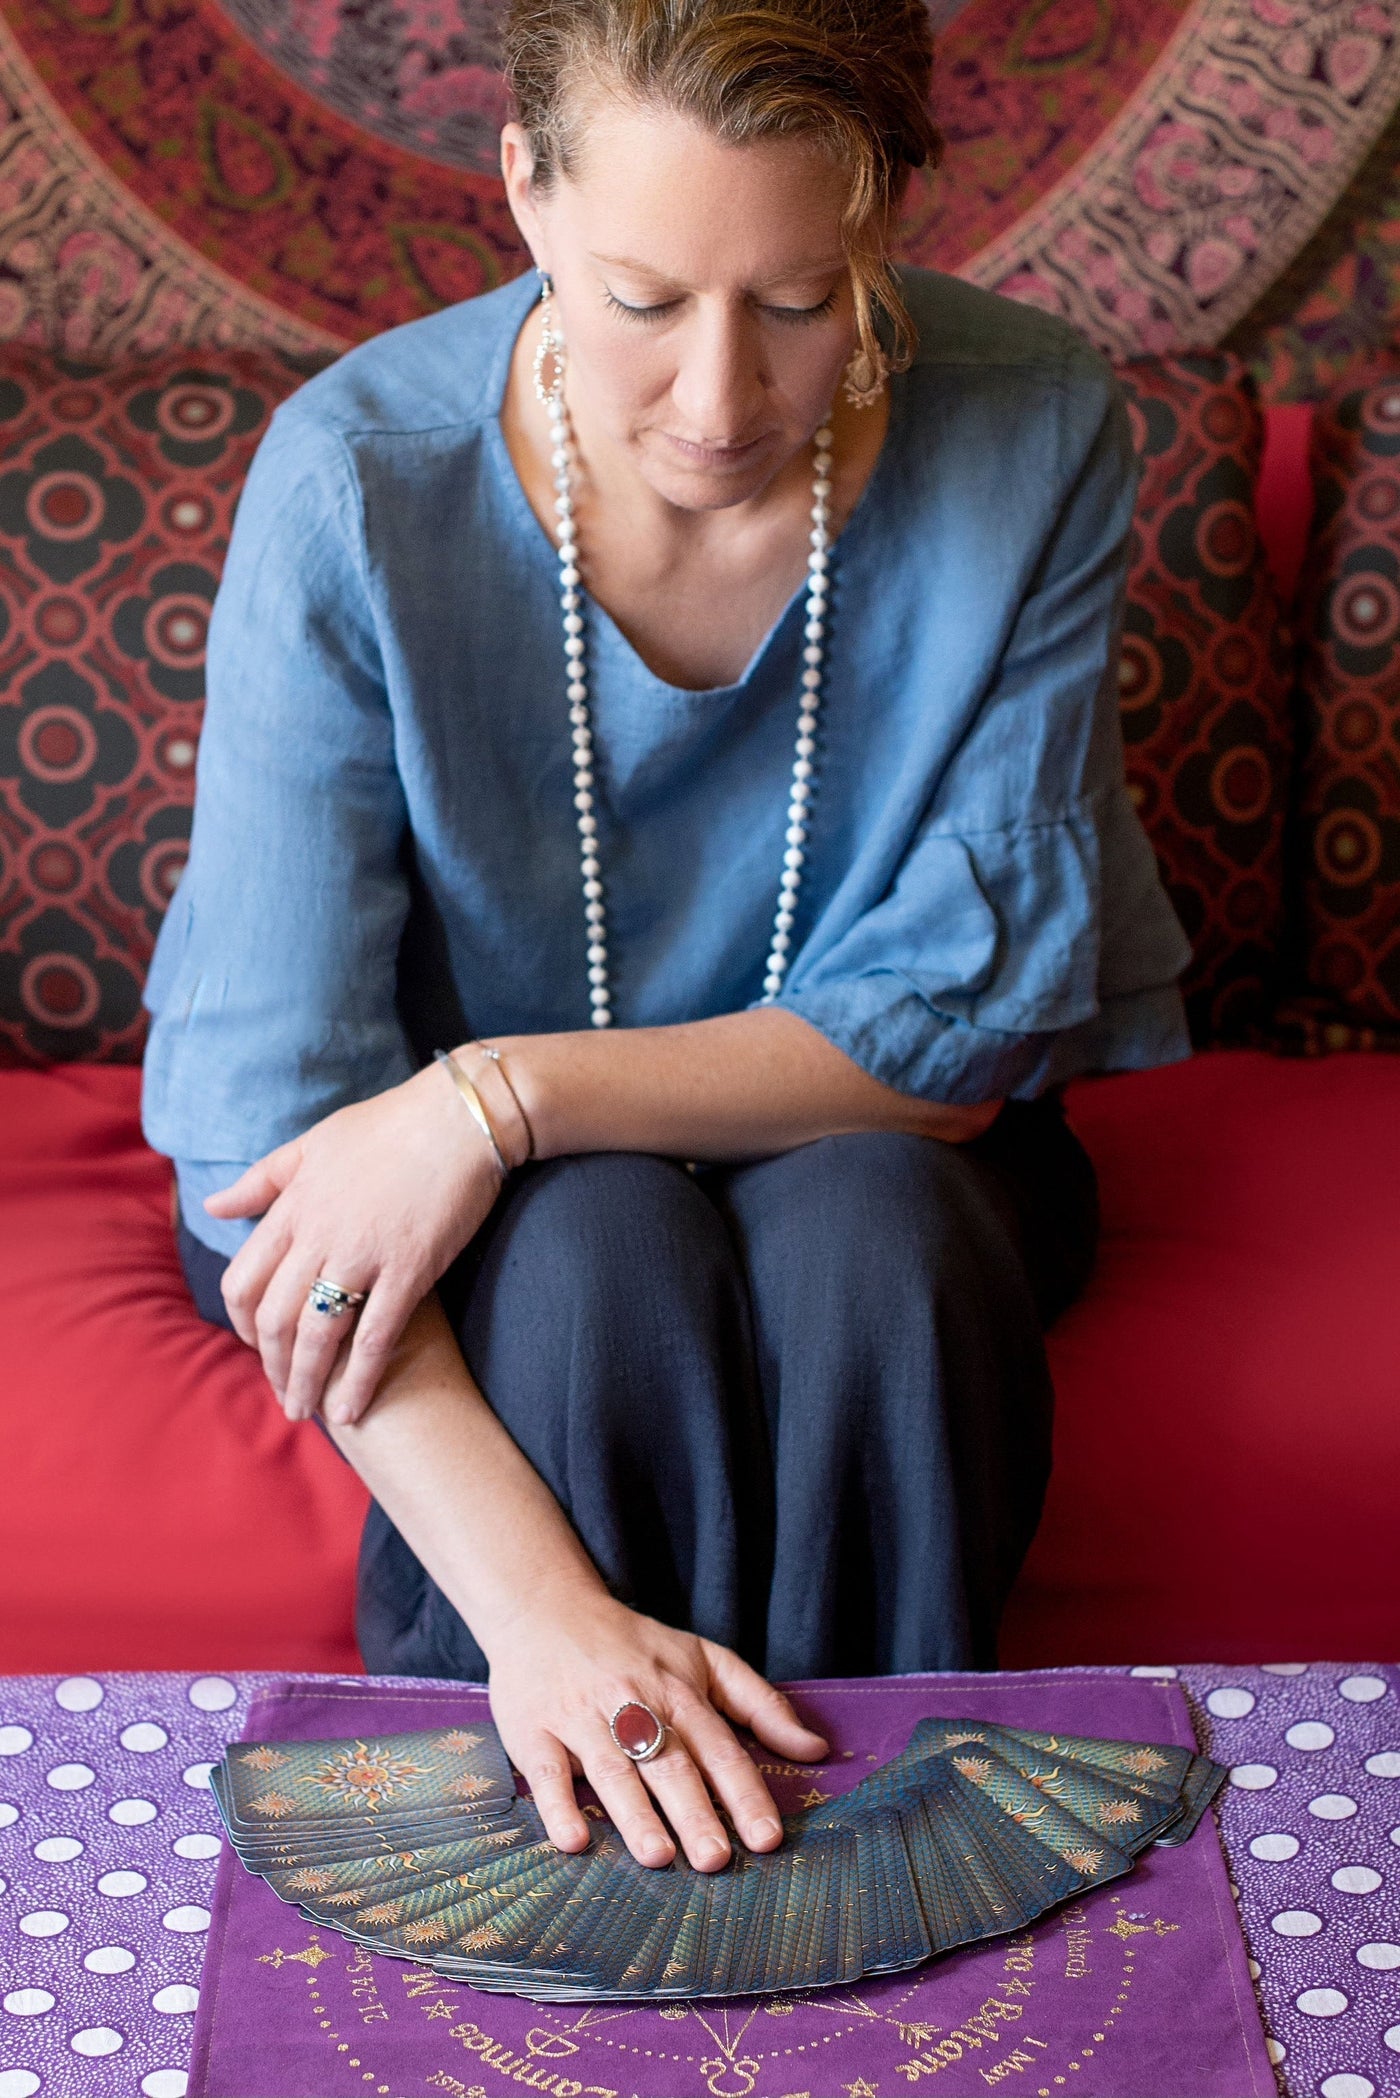 Tarot readings with Julie! Sat, June 8th